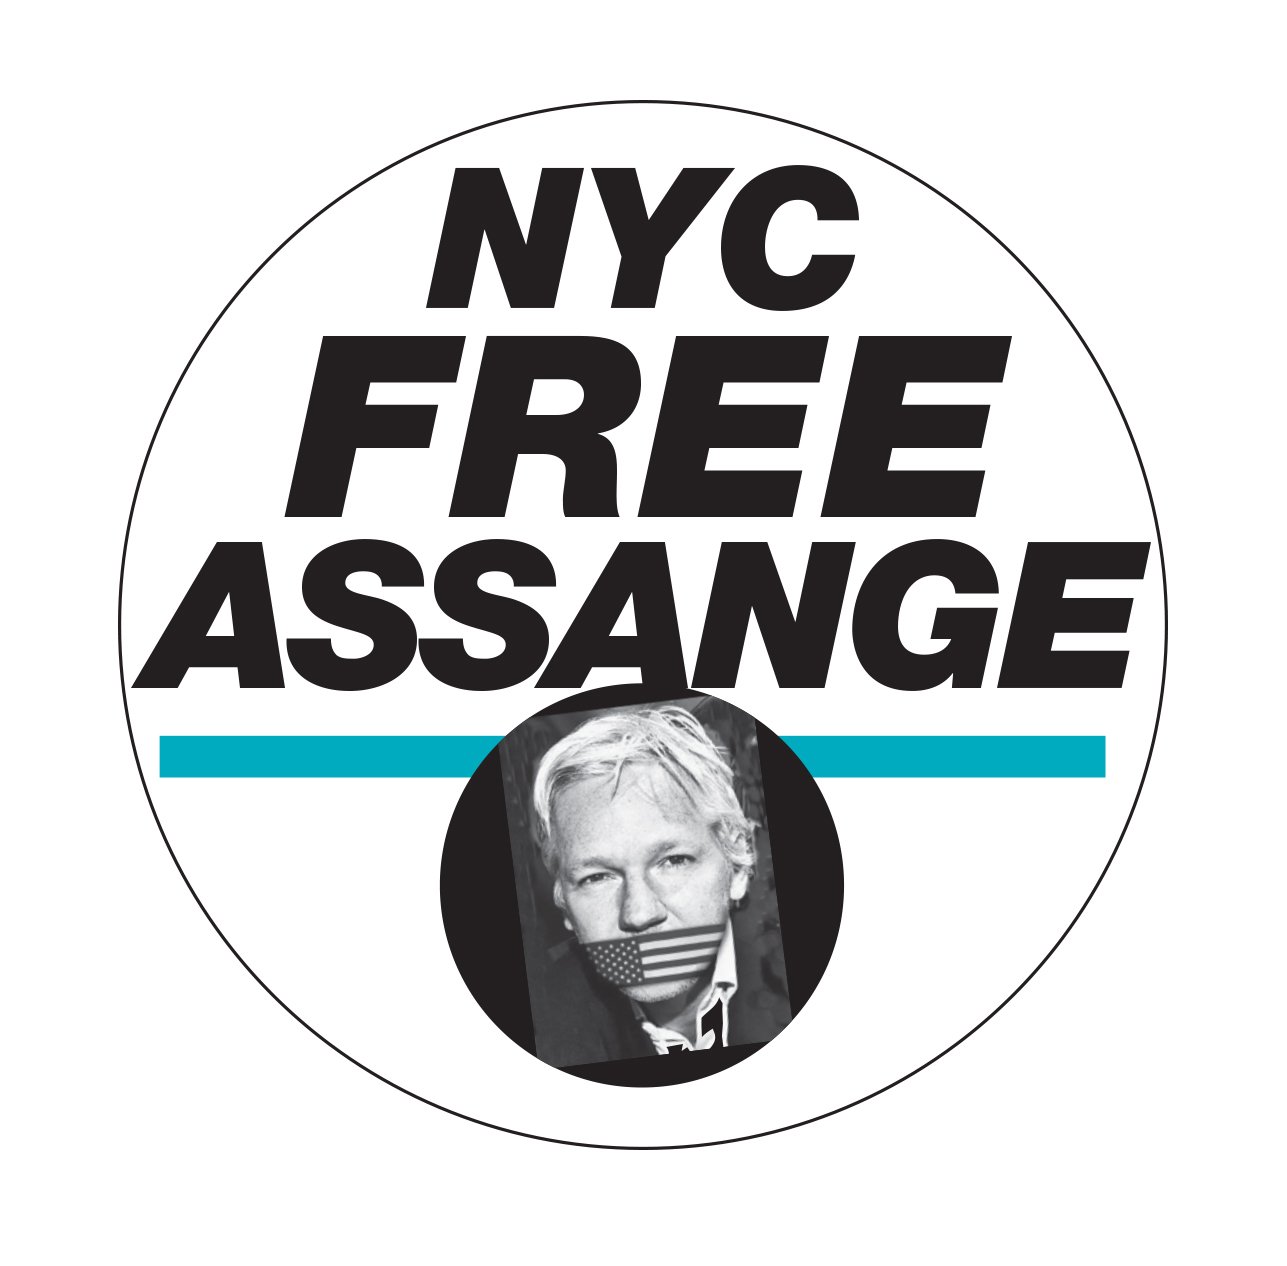 NYC Free Assange demands freedom for award-winning publisher & journalist Julian Assange as we did for courageous whistle-blower Chelsea Manning.